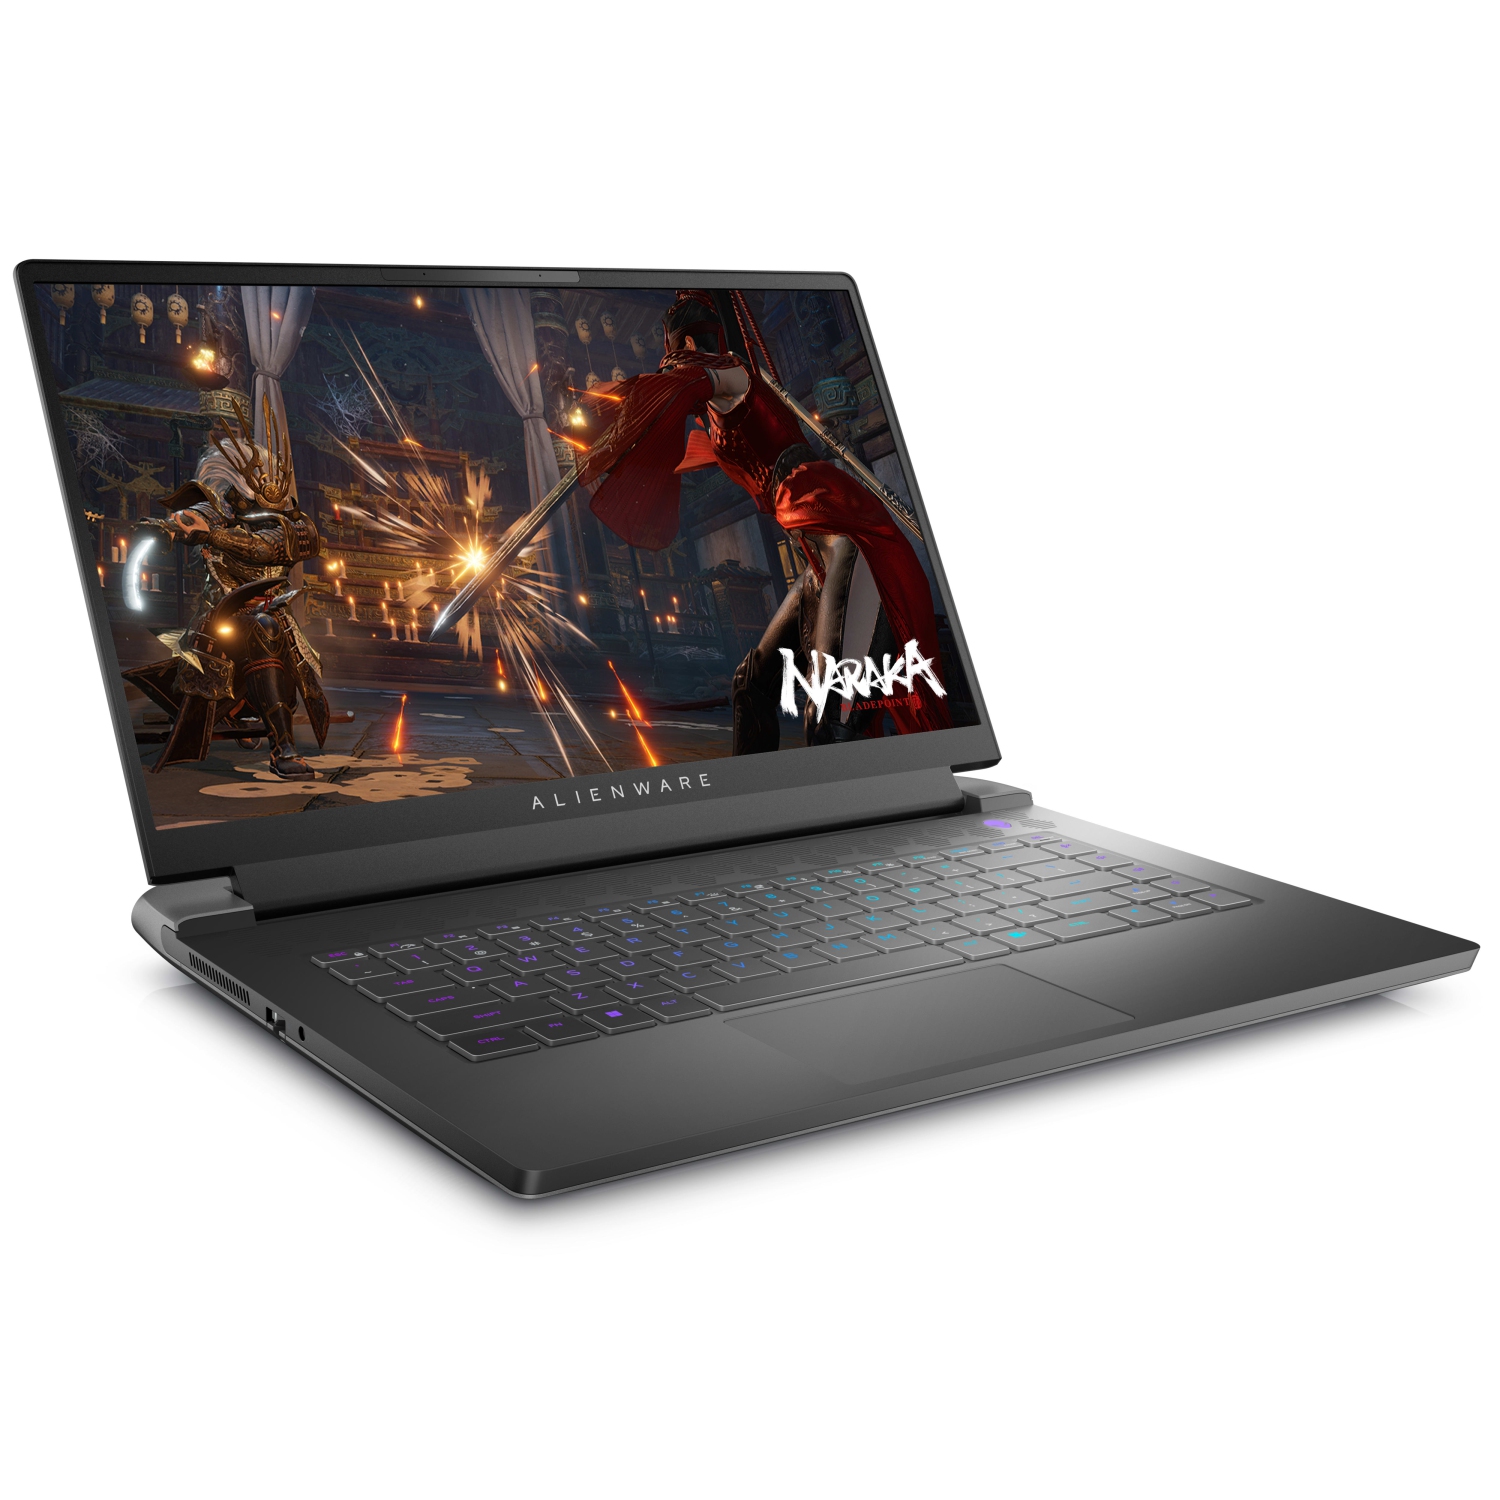 Refurbished (Excellent) – Dell Alienware m15 R7 Gaming Laptop (2022) | 15.6" QHD | Core i7 - 2TB SSD + 2TB SSD - 64GB RAM - RTX 3060 | 14 Cores @ 4.7 GHz - 12th Gen CPU - 6GB GDDR6